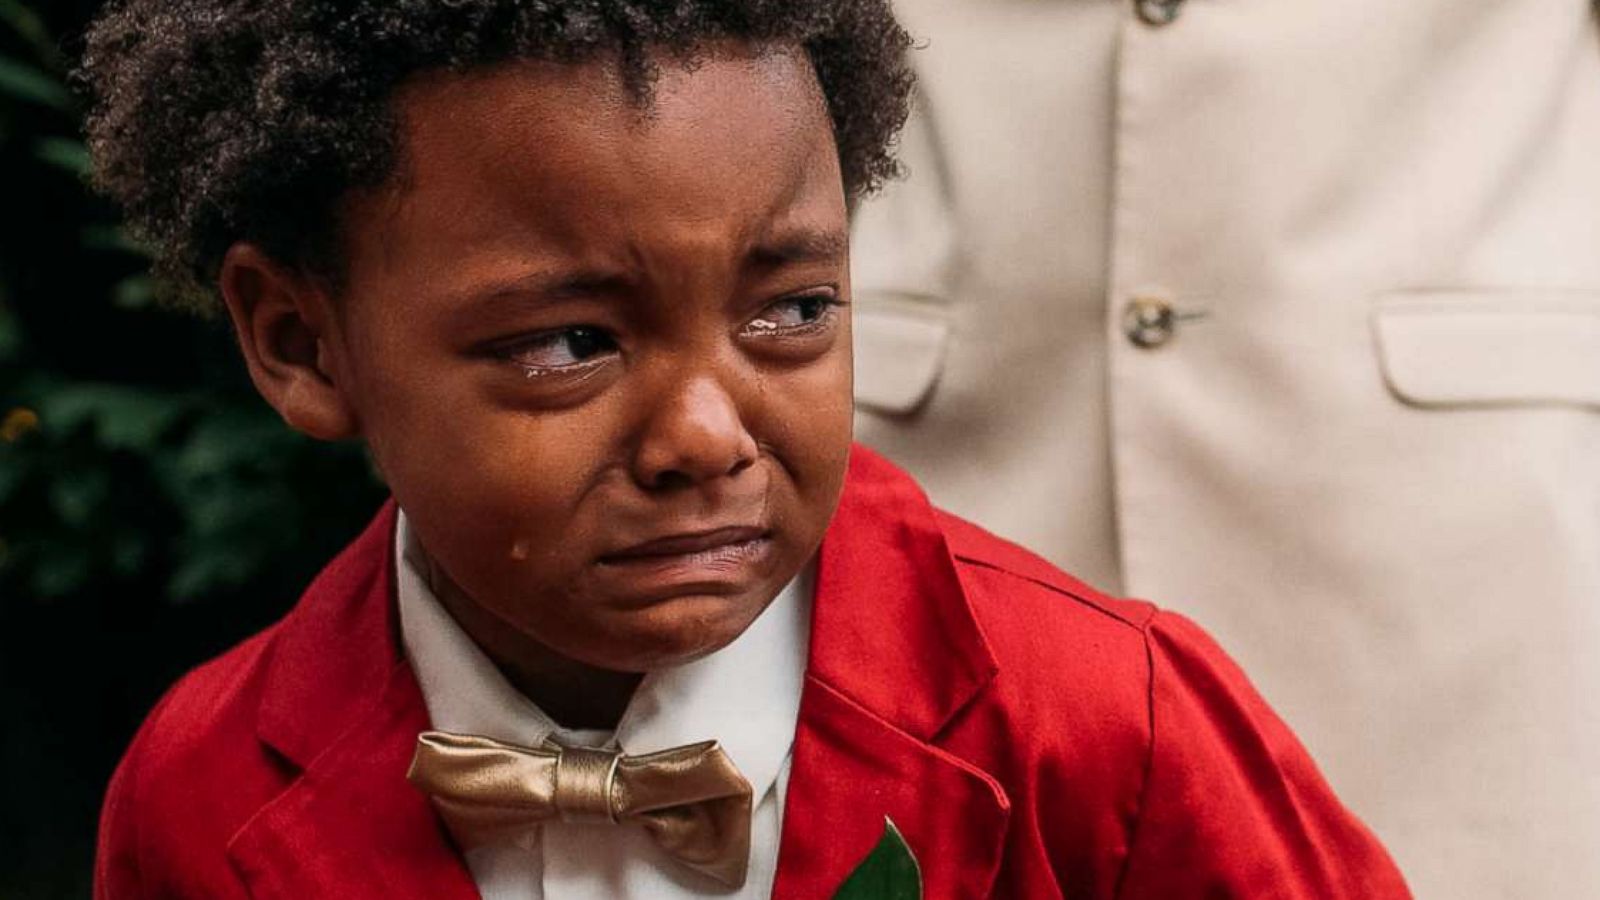 PHOTO: A photo of Bryson Suber, 6, sobbing as he watches his mother Tearra Suber walk down the aisle has gone viral.